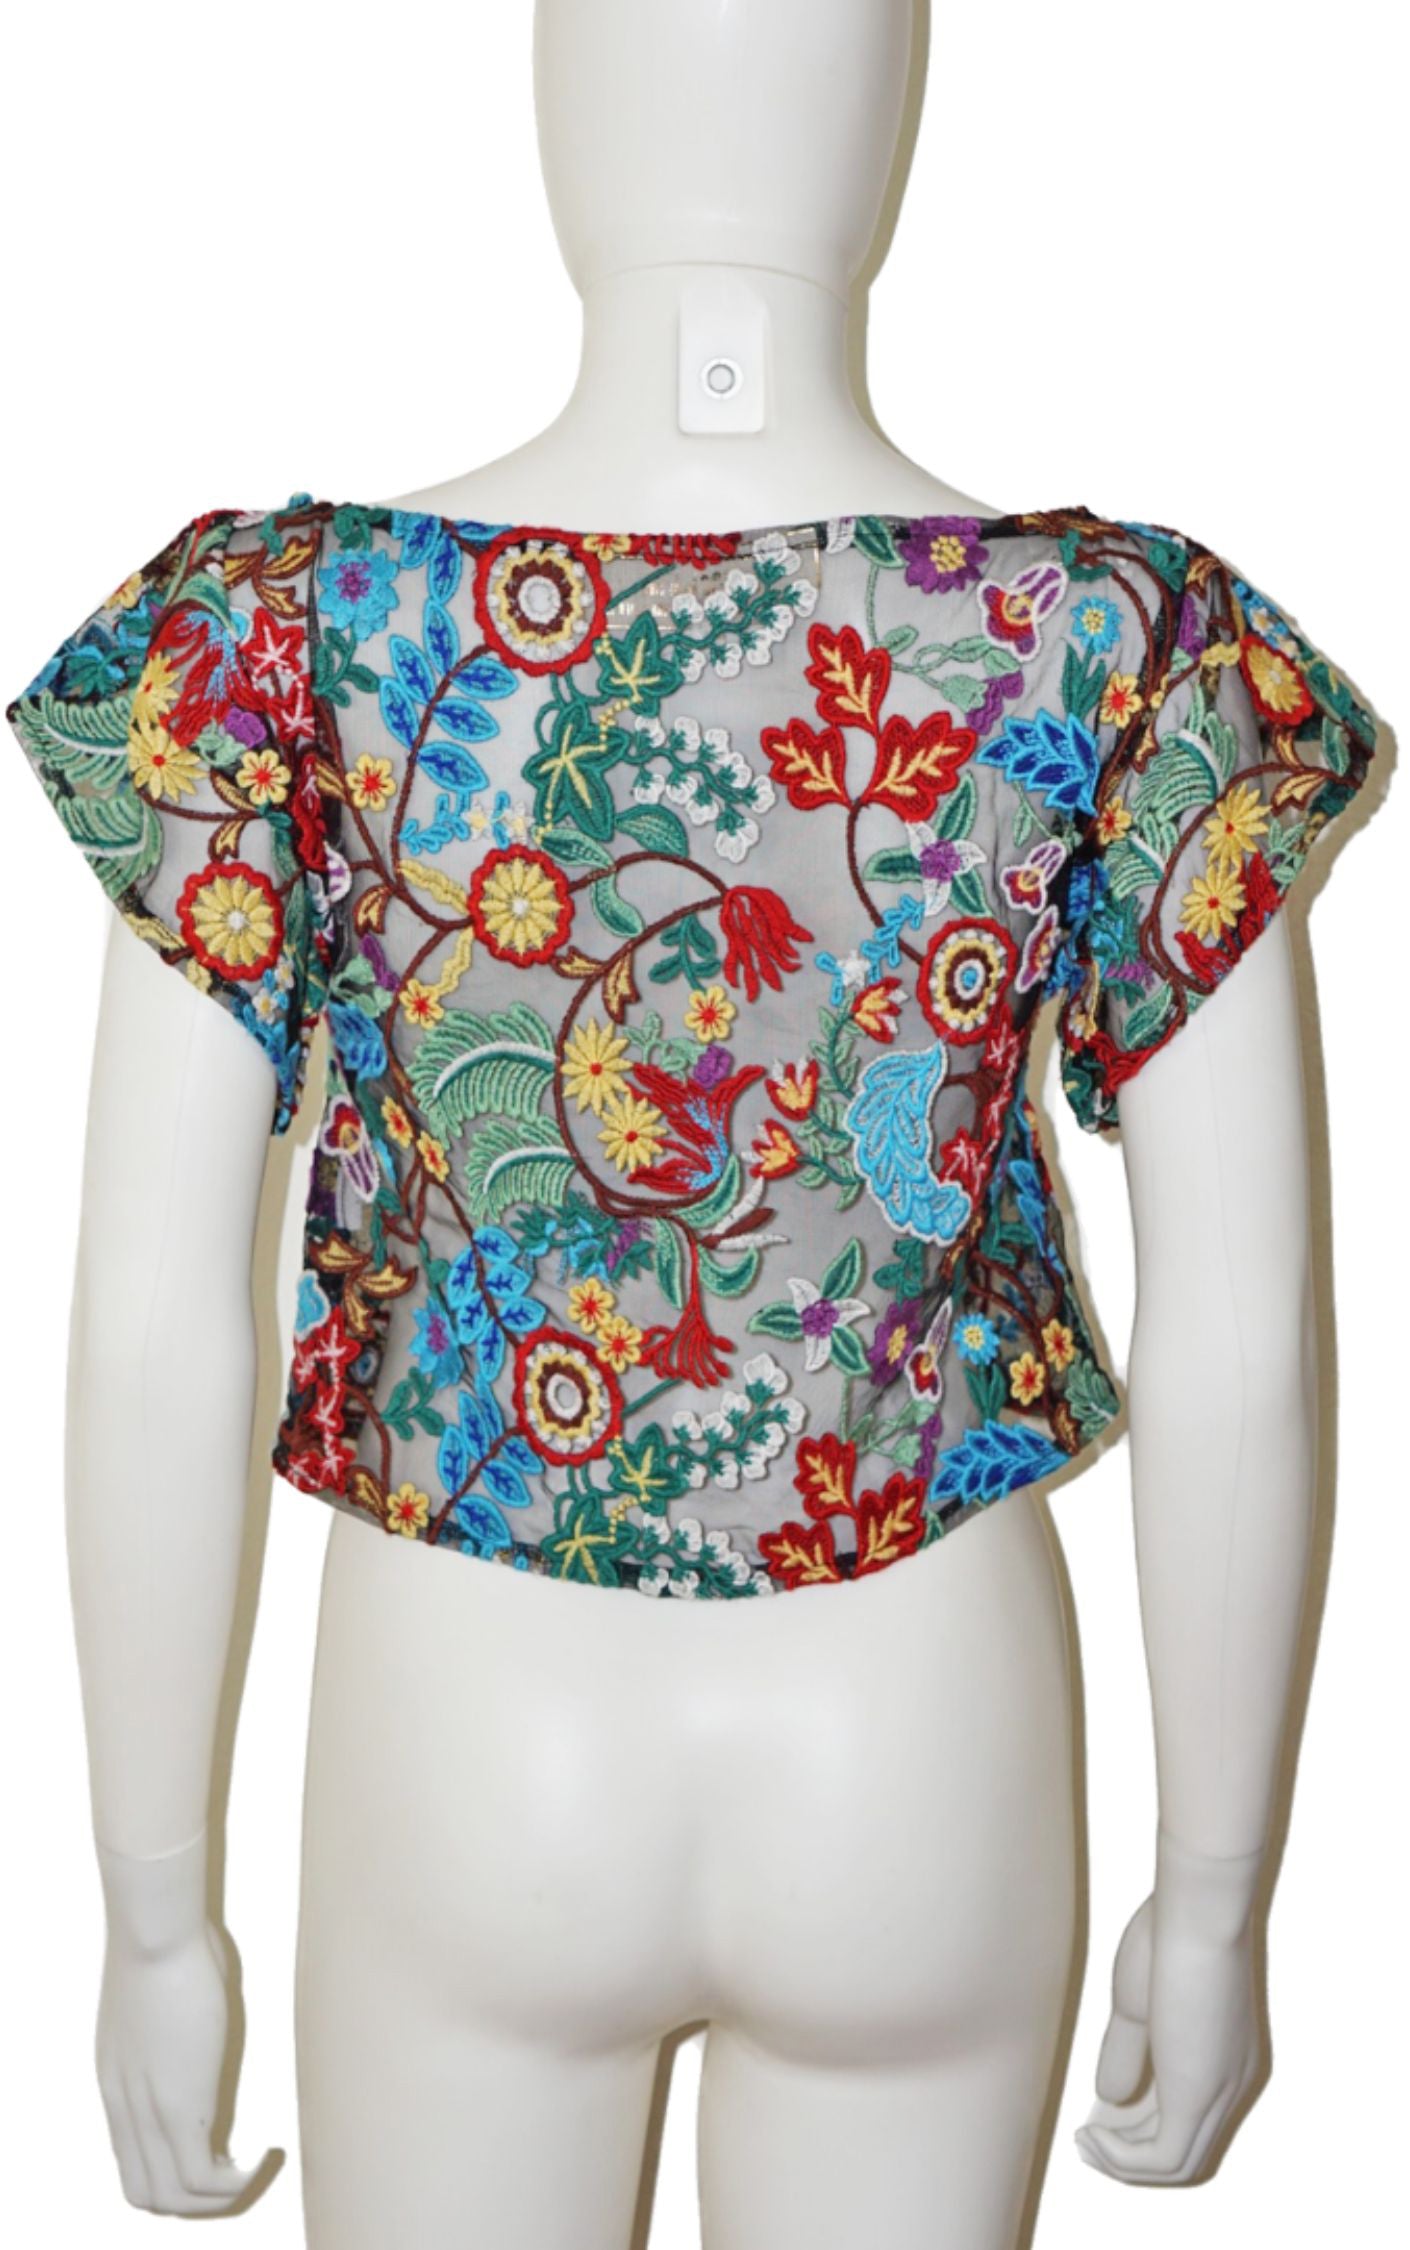 JEN'S PIRATE BOOTY Revolve Floral Embroidered Top resellum